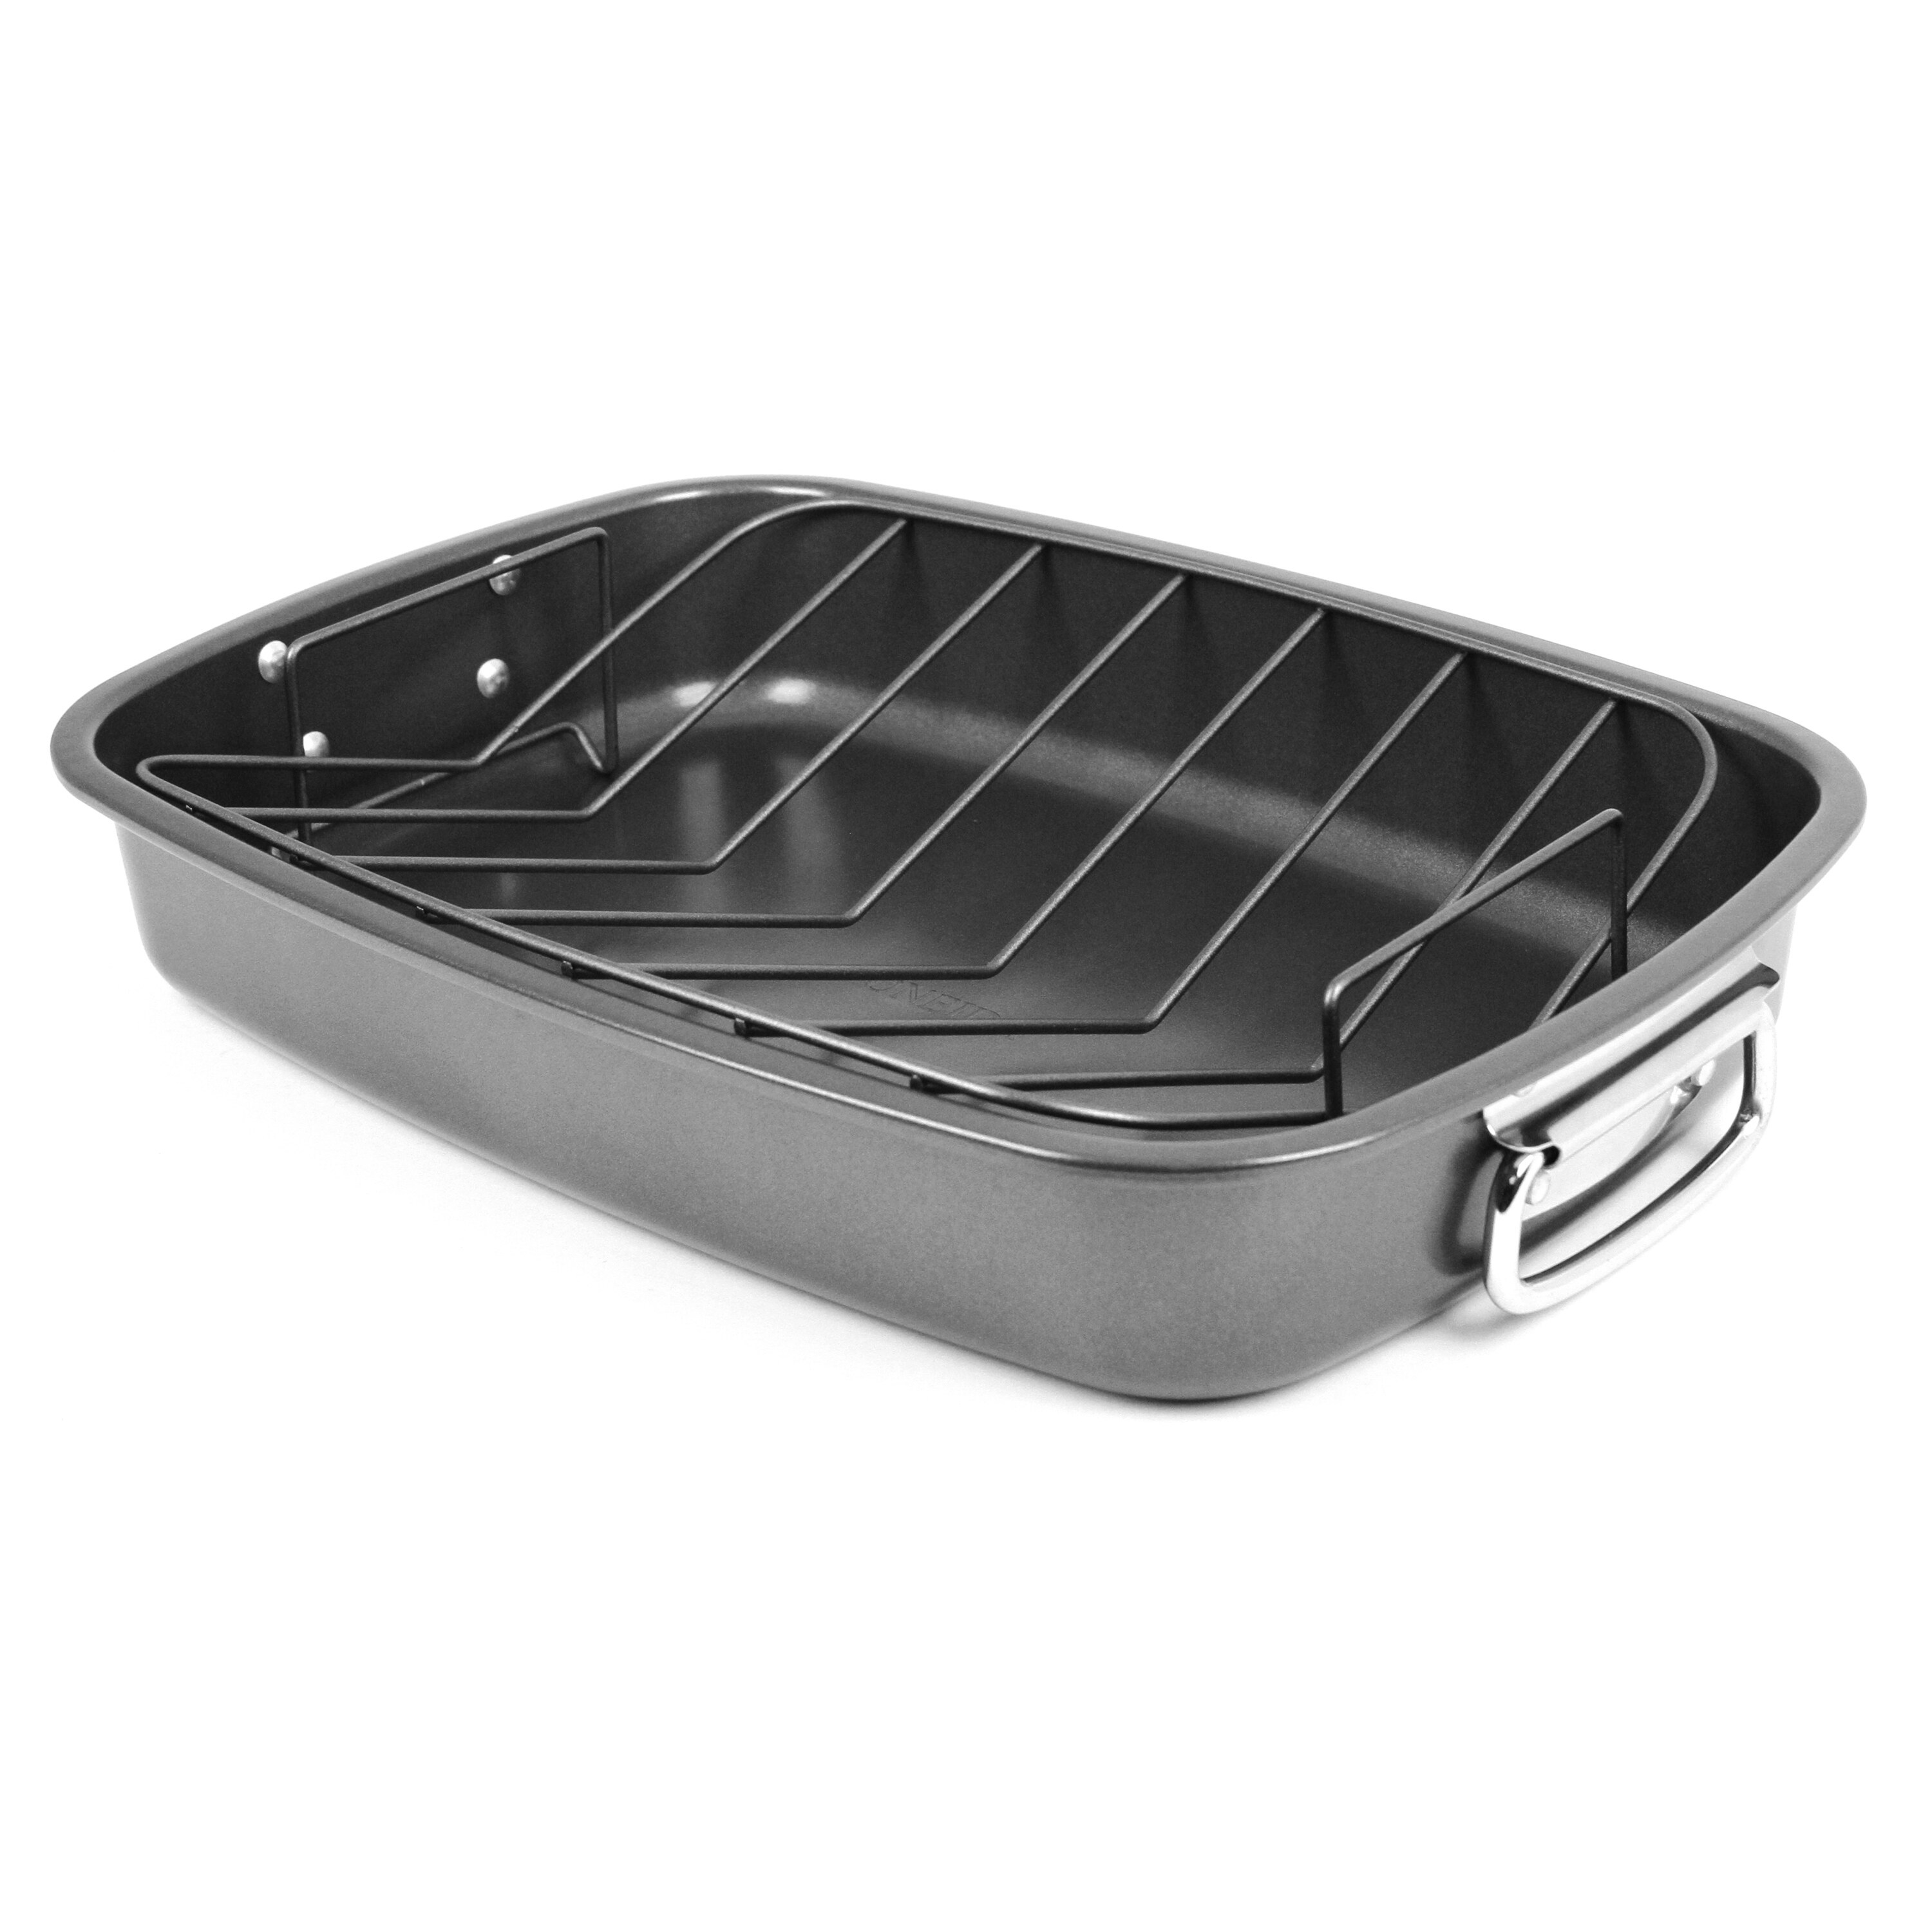 https://ak1.ostkcdn.com/images/products/11621570/Oneida-Carbon-Steel-Roaster-with-Non-stick-V-rack-and-fold-down-handles-46aa7444-7200-465d-ac0d-c350d0ded461.jpg